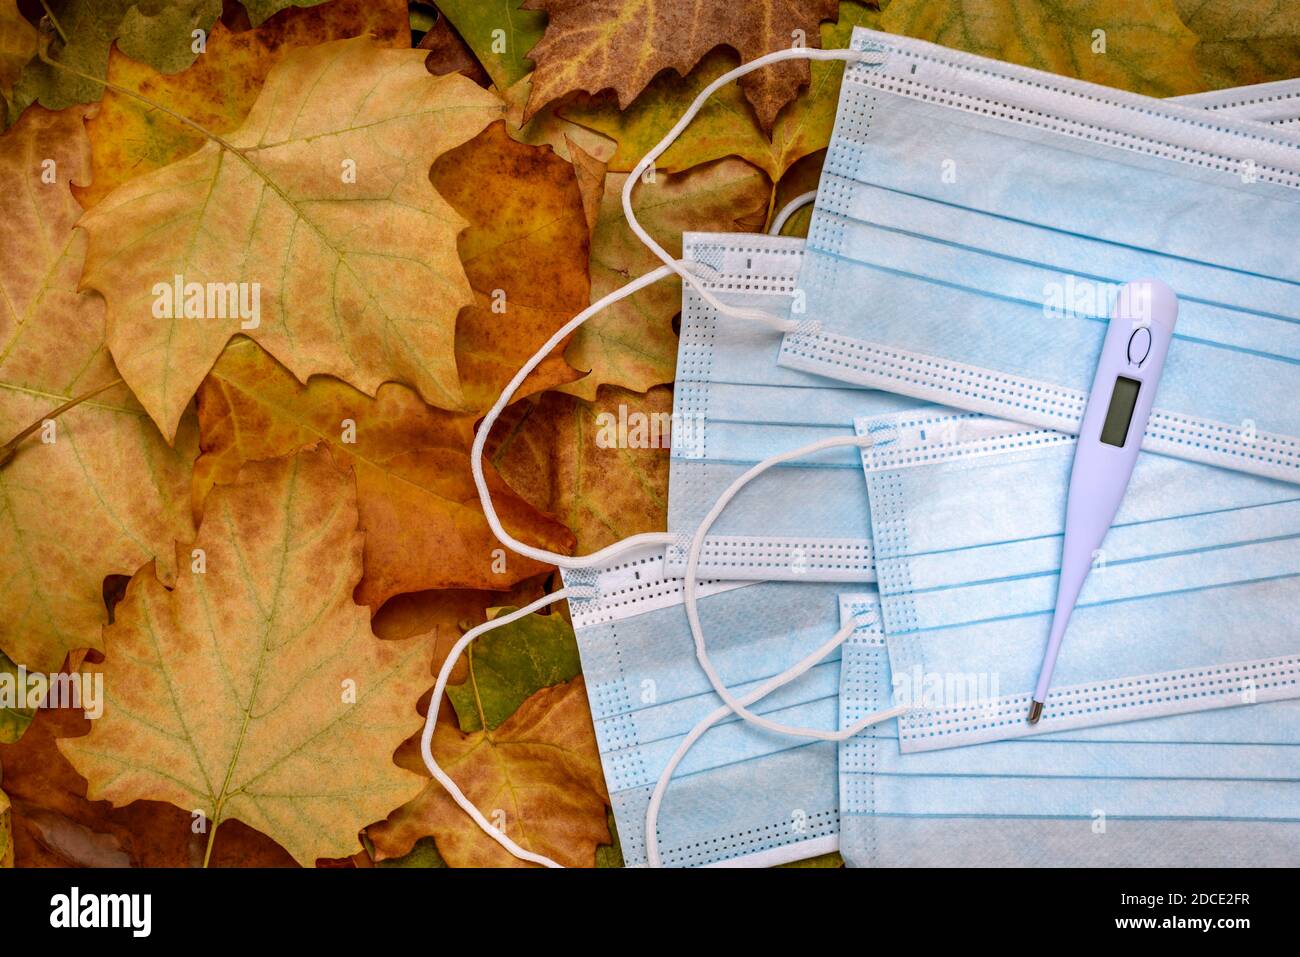 Blue face masks and glass thermometer for measuring the temperature of the human body on dry autumn leaves. Stock Photo